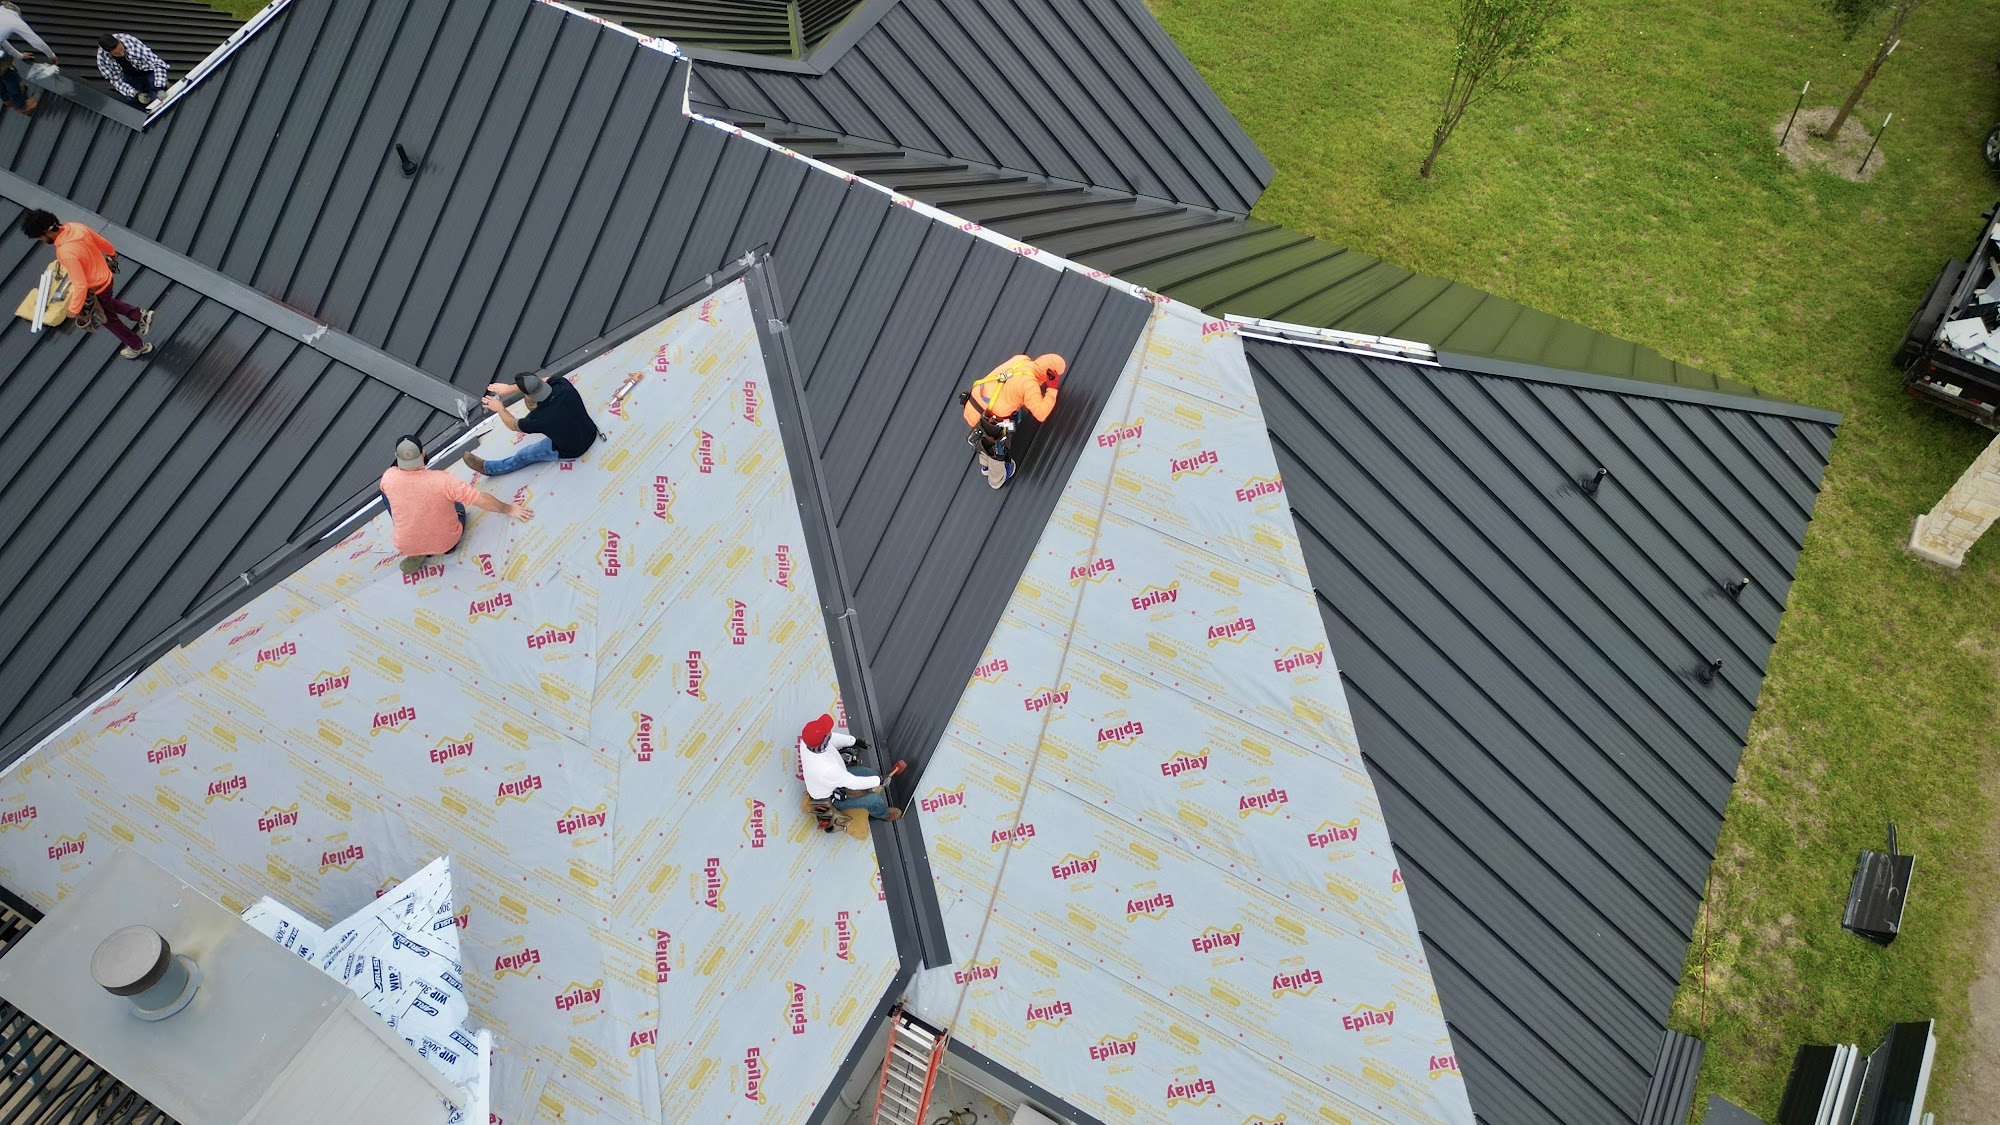 Comanche Roofing - Metal Roofing & Repair